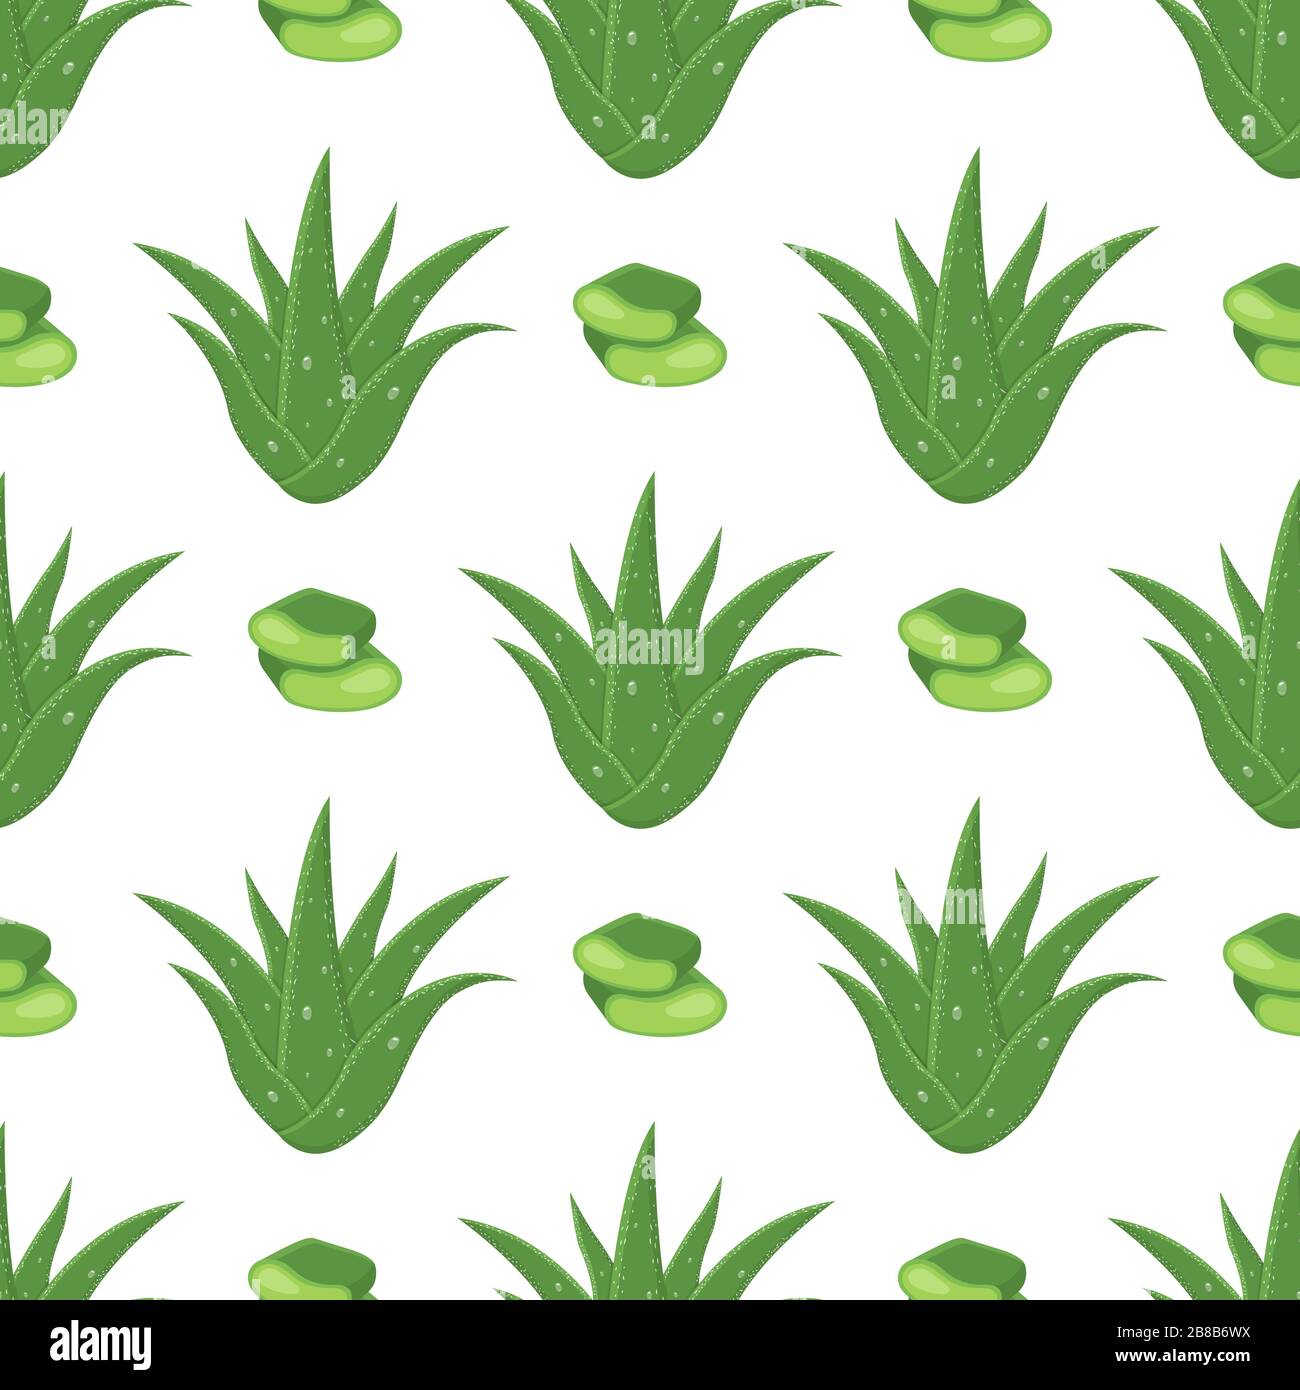 Seamless pattern with aloe vera medicinal plant cut leaves